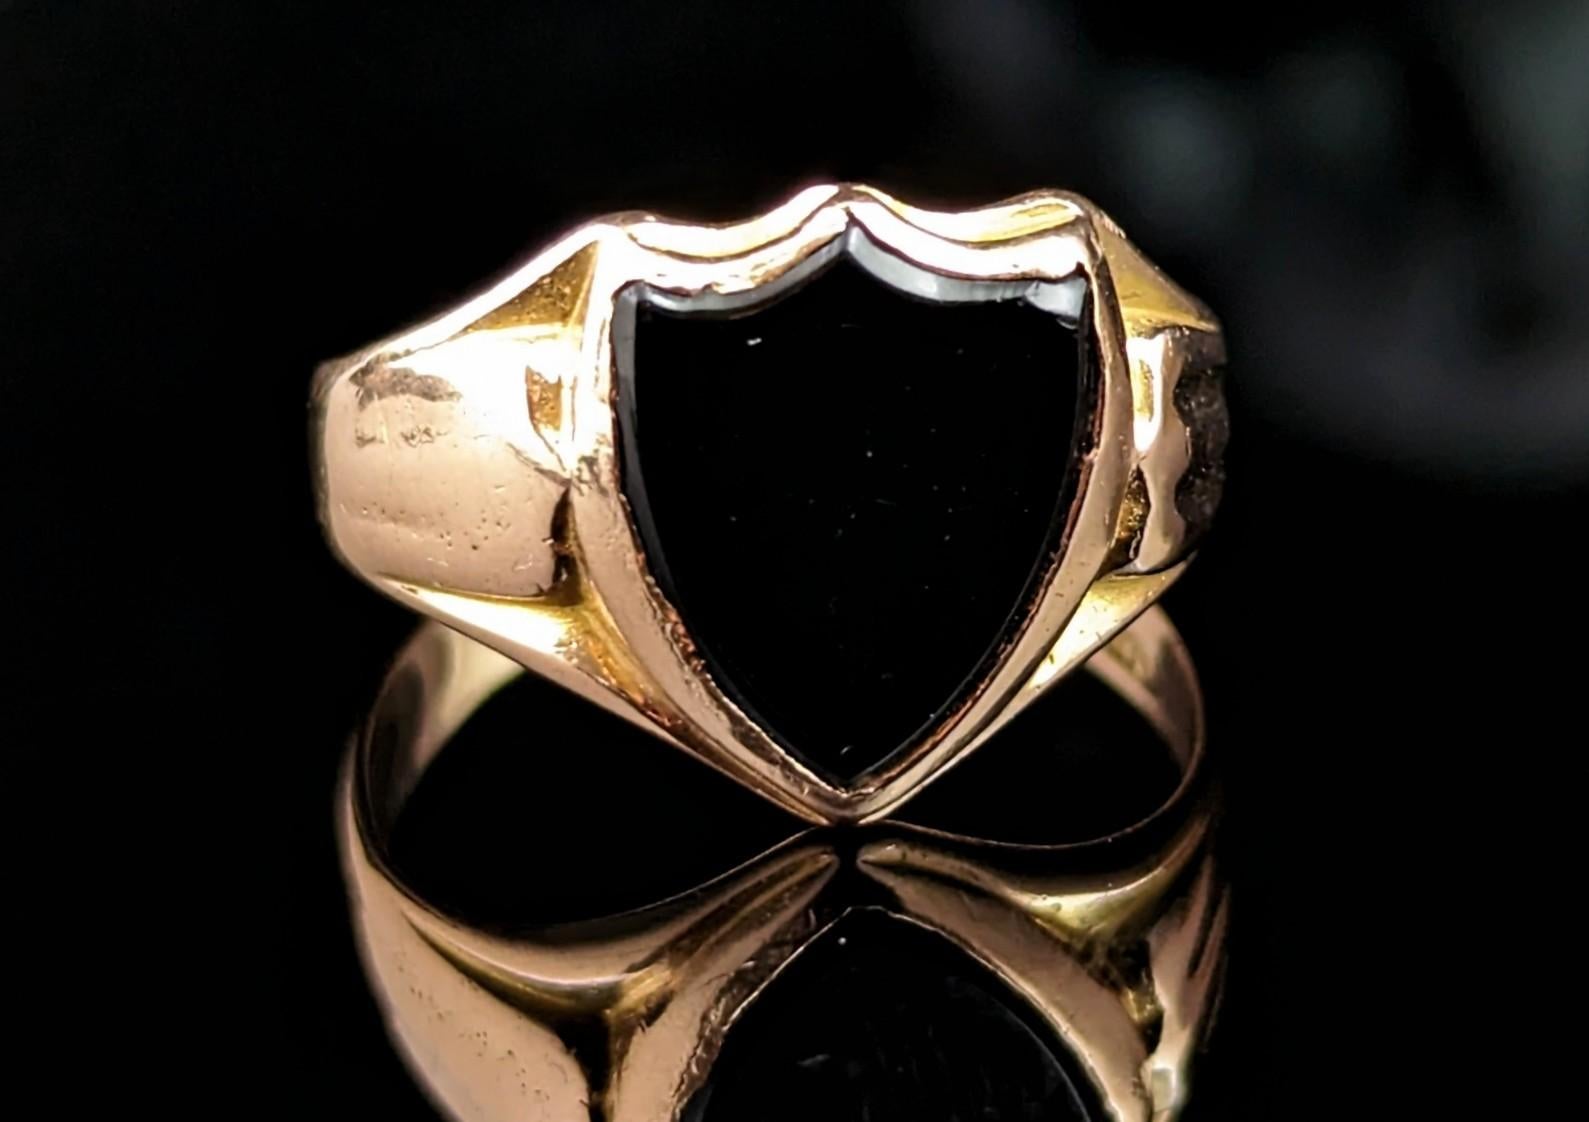 This handsome antique, Victorian era
15kt gold and Black onyx signet ring has everything you could wish for in a signet ring!

It has a shield shaped face set with an inky black Onyx stone, the moody tone complementing the warm rosey gold perfectly,